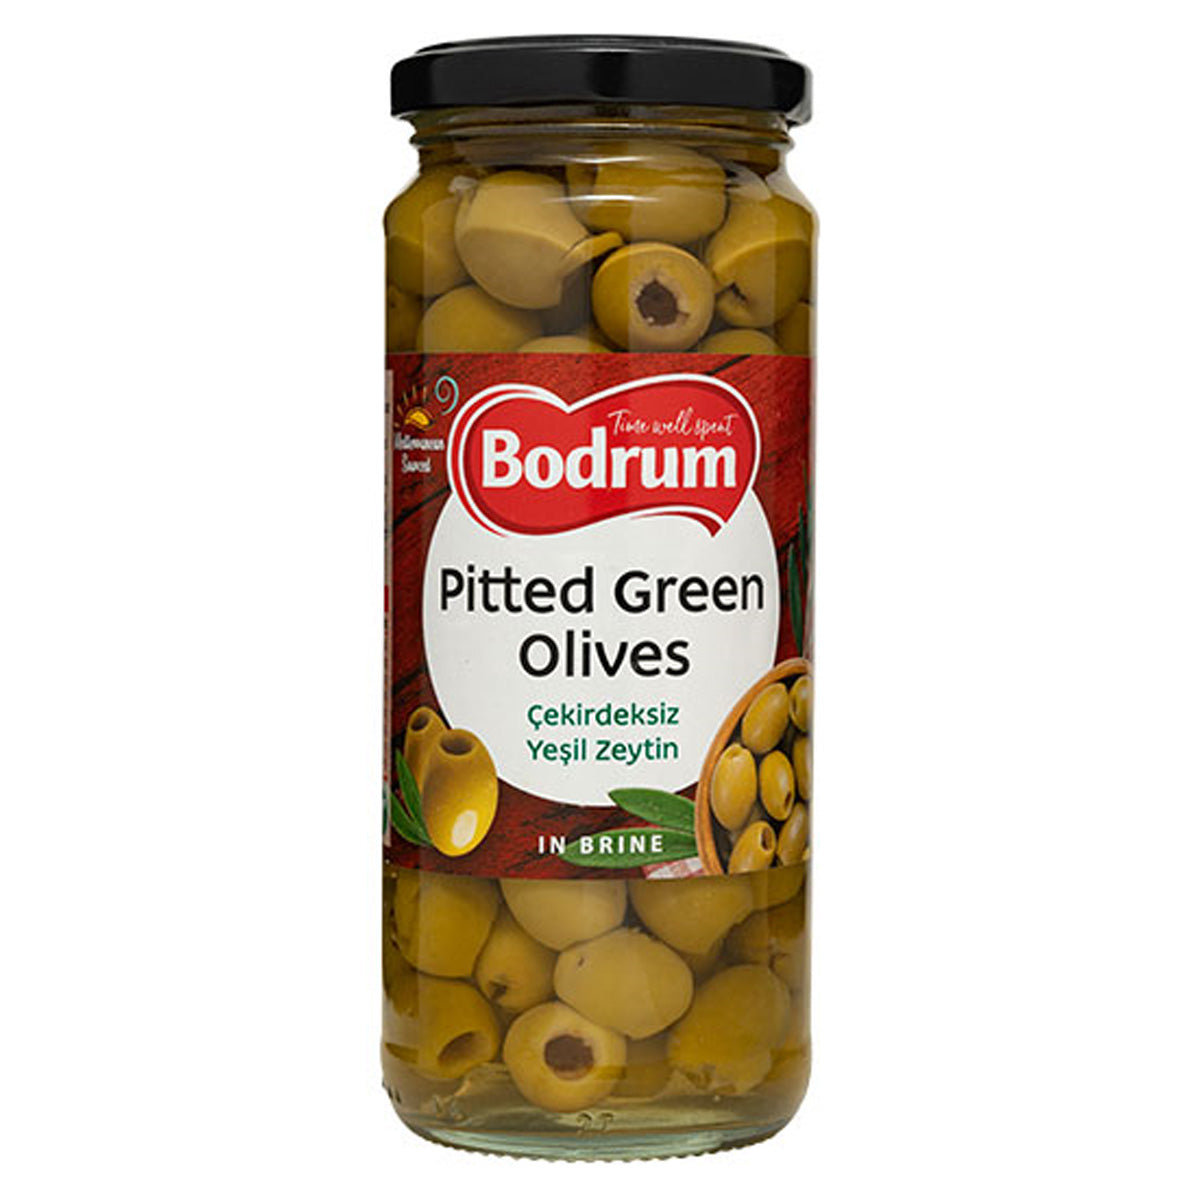 Bodrum - Pitted Green Olives - 340g - Continental Food Store